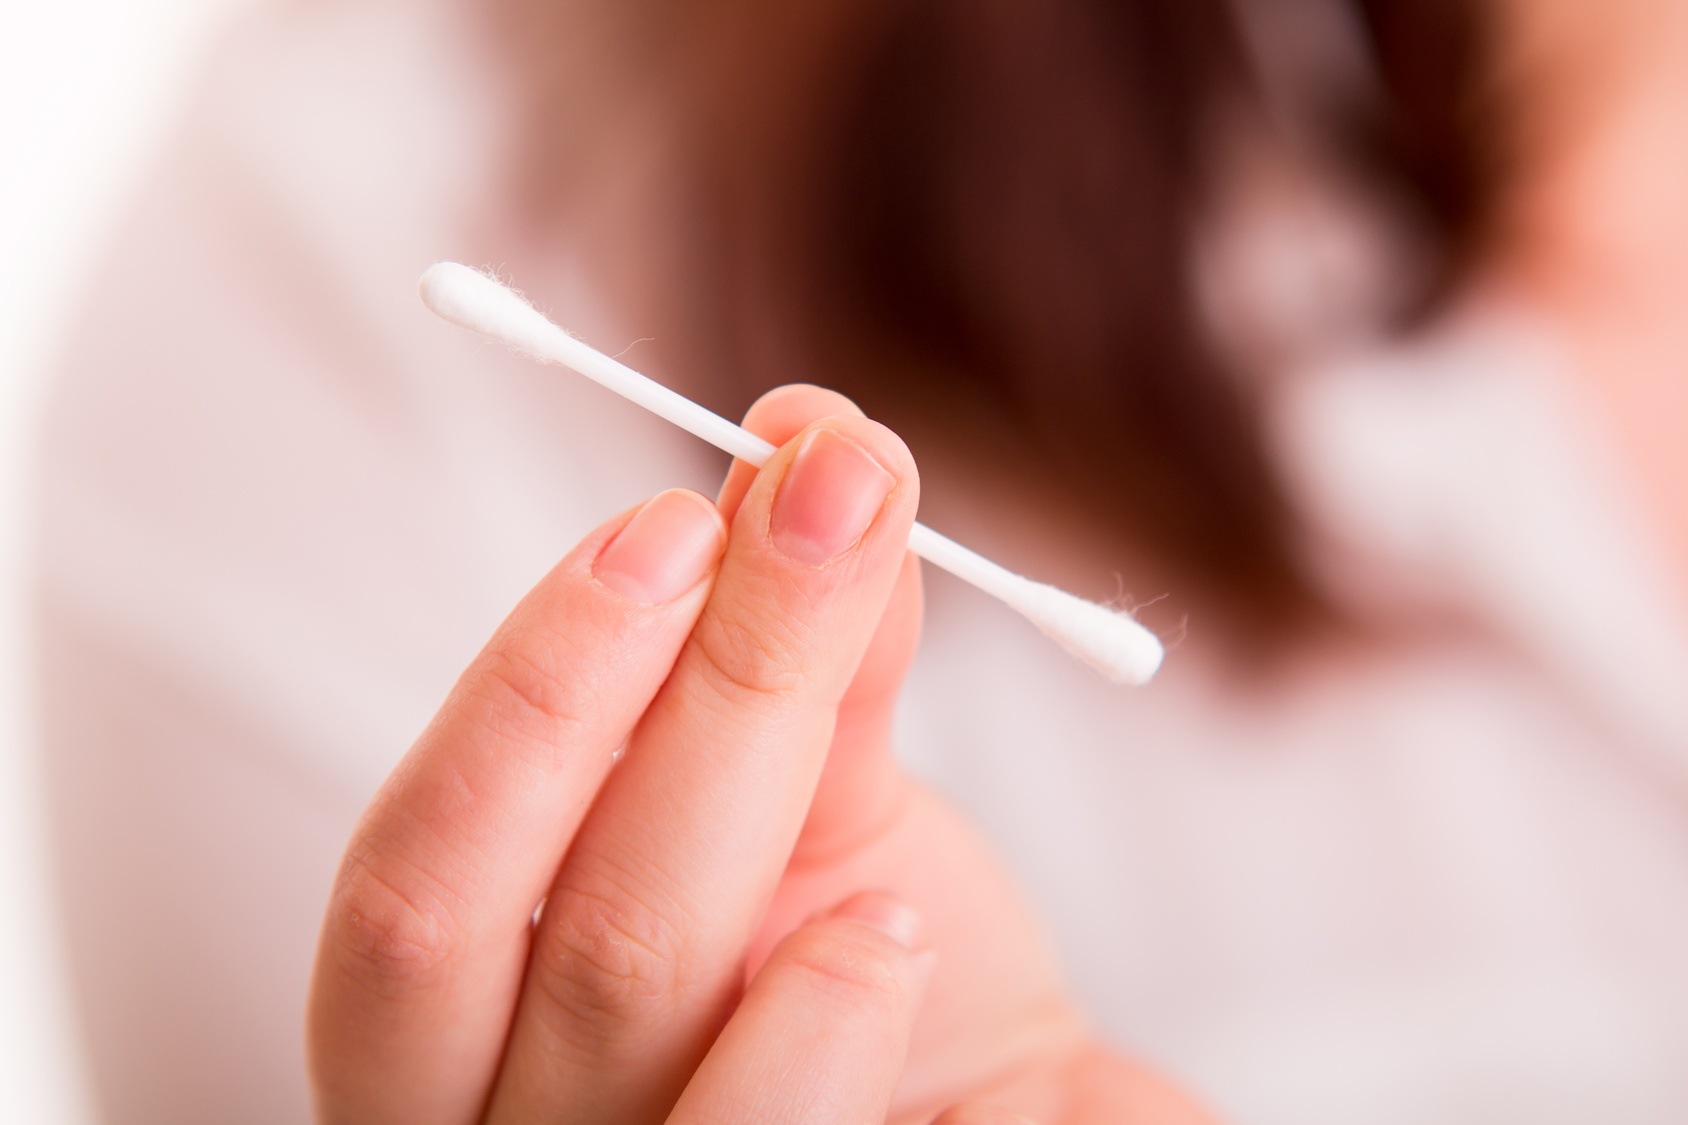 Cotton buds in woman’s hand